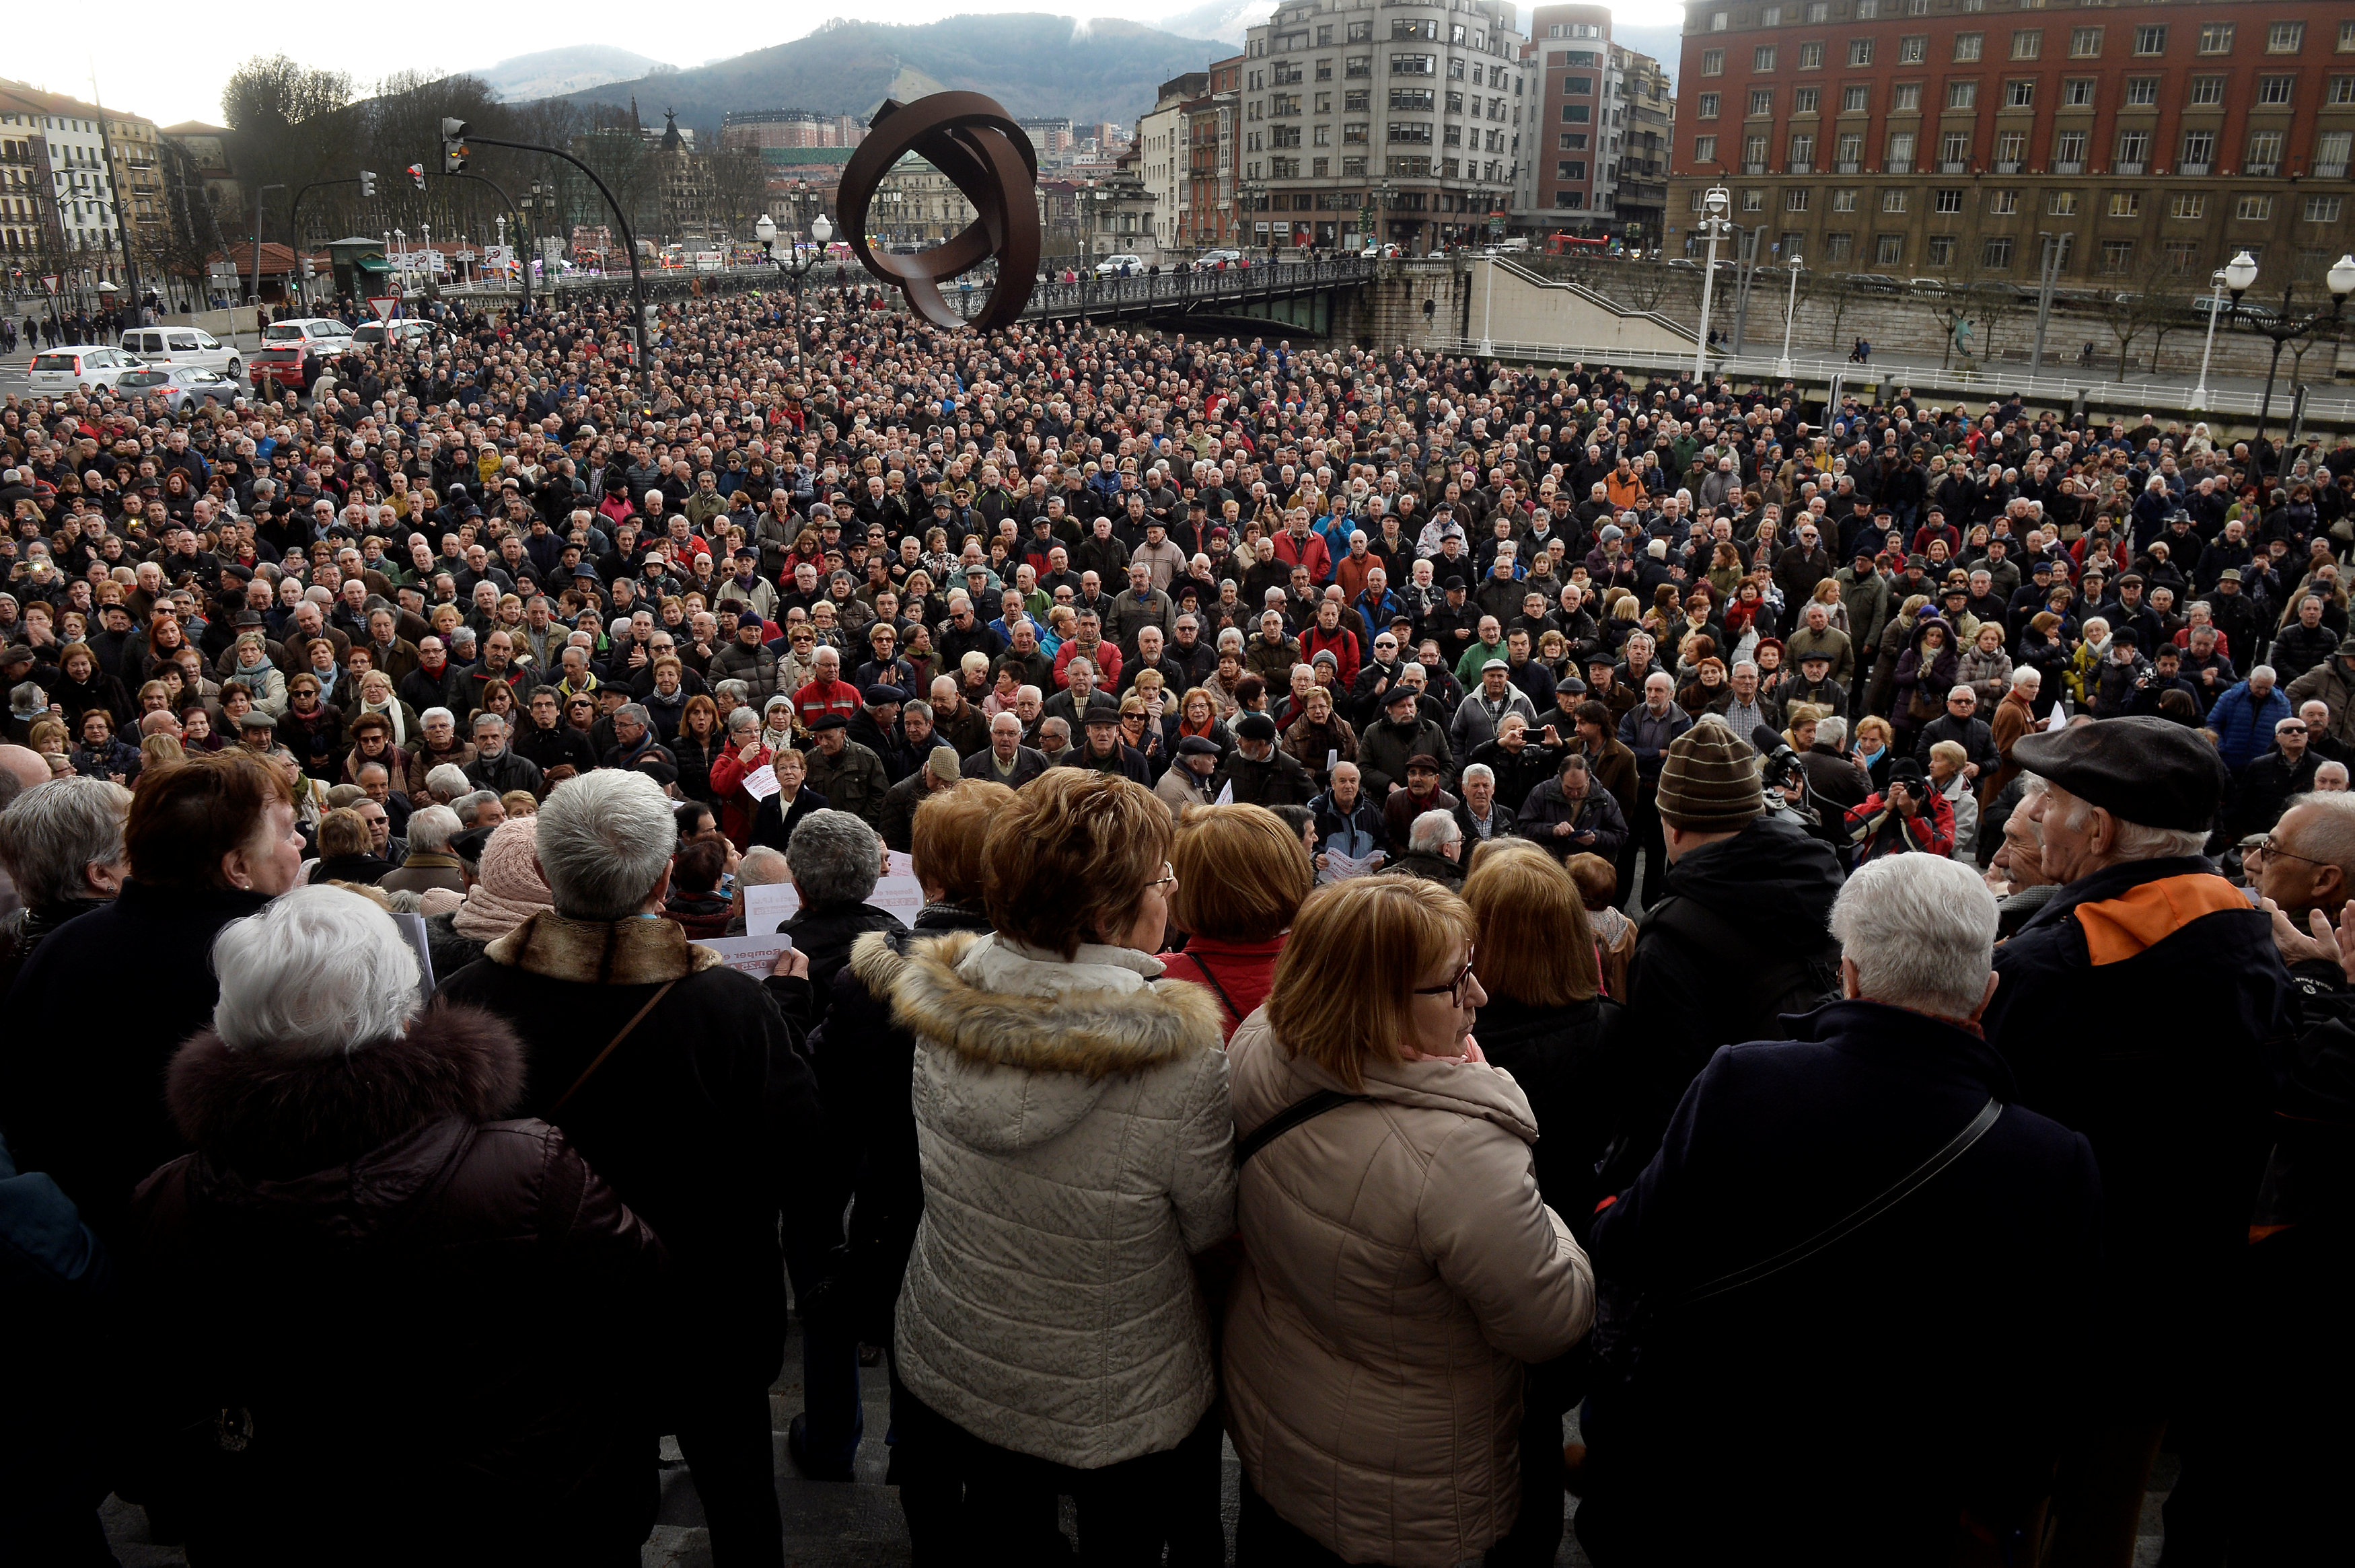 Pensioners take part in a protest in favor of higher state pensions, in Bilbao, Spain, Feb. 12, 2018.